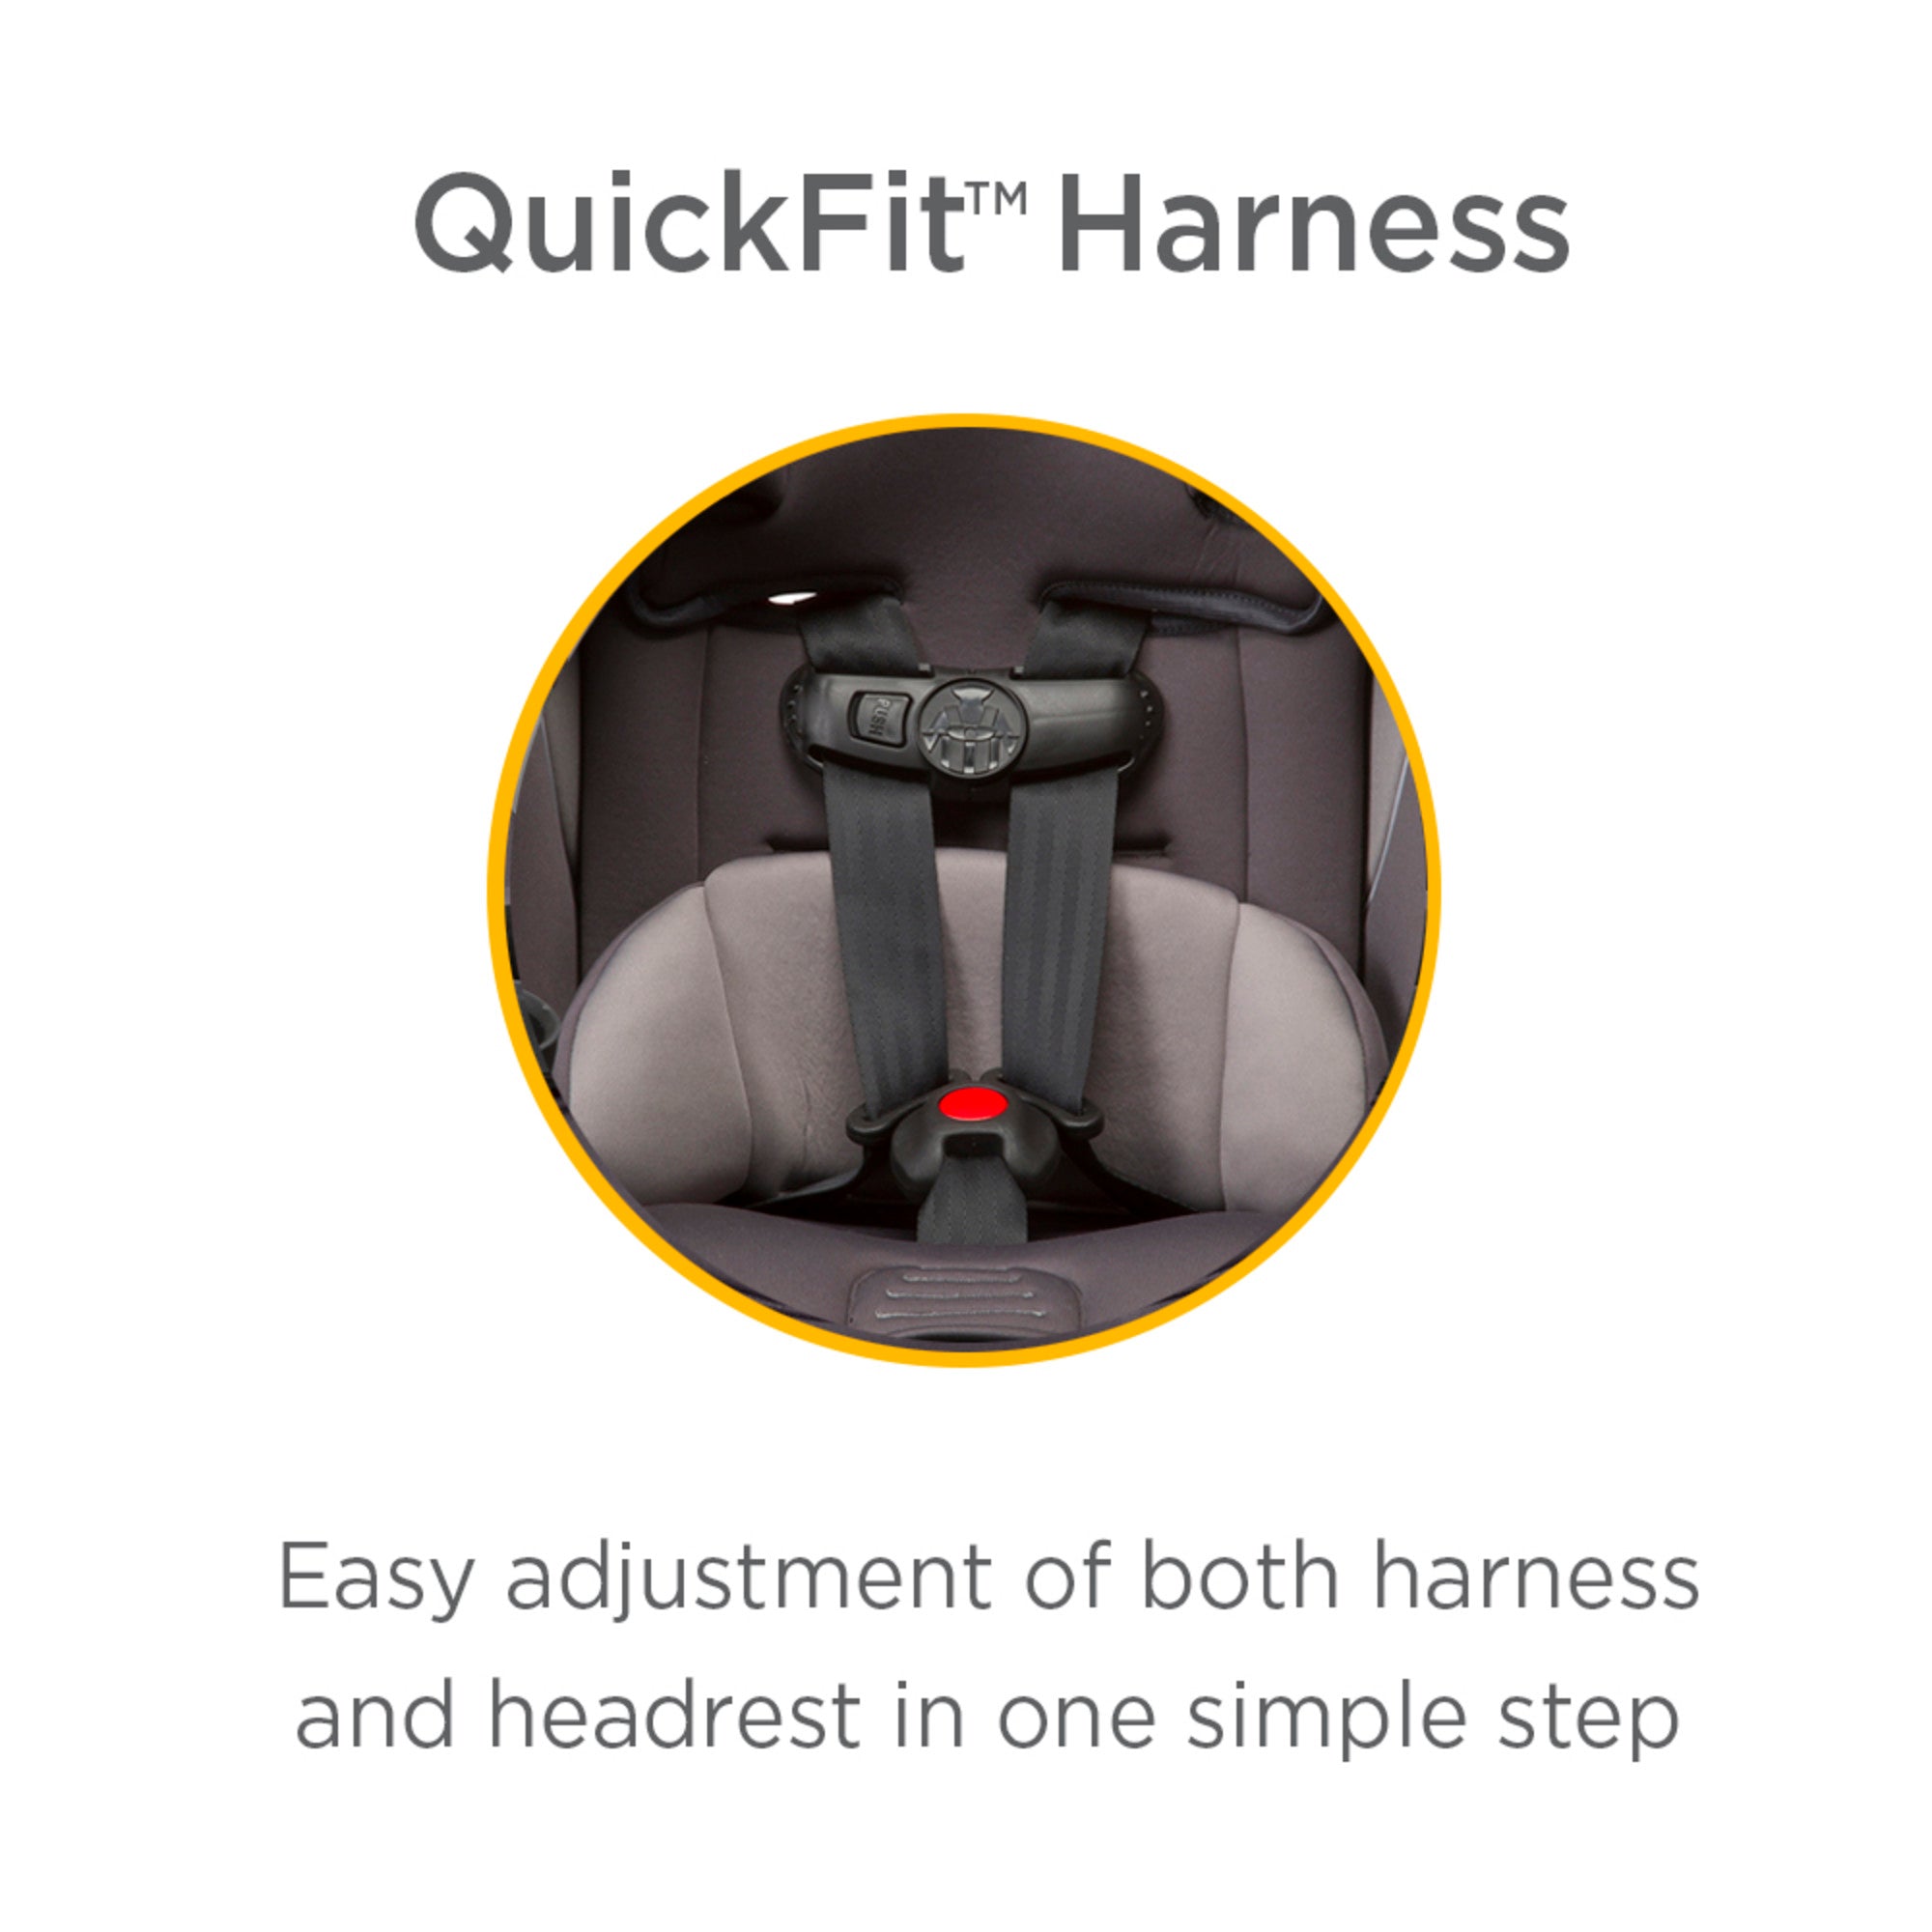 Car seat with QuickFit Harness. Easy adjustment of both harness and headrest in one simple step.